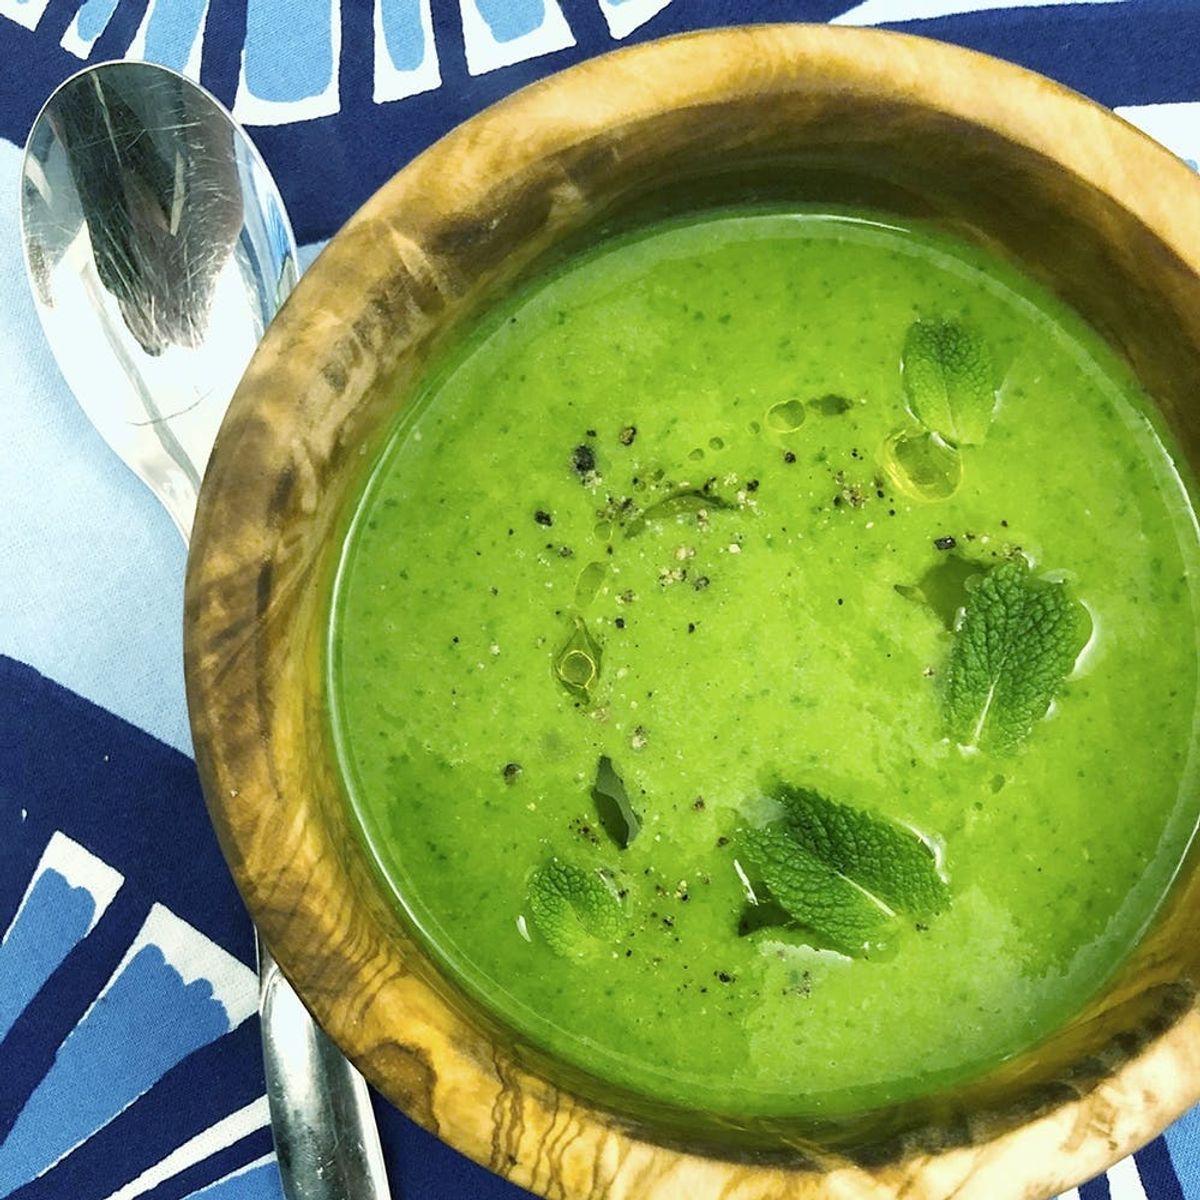 An Easy Blender Soup Recipe for Those Sneaky Cold Days of Spring